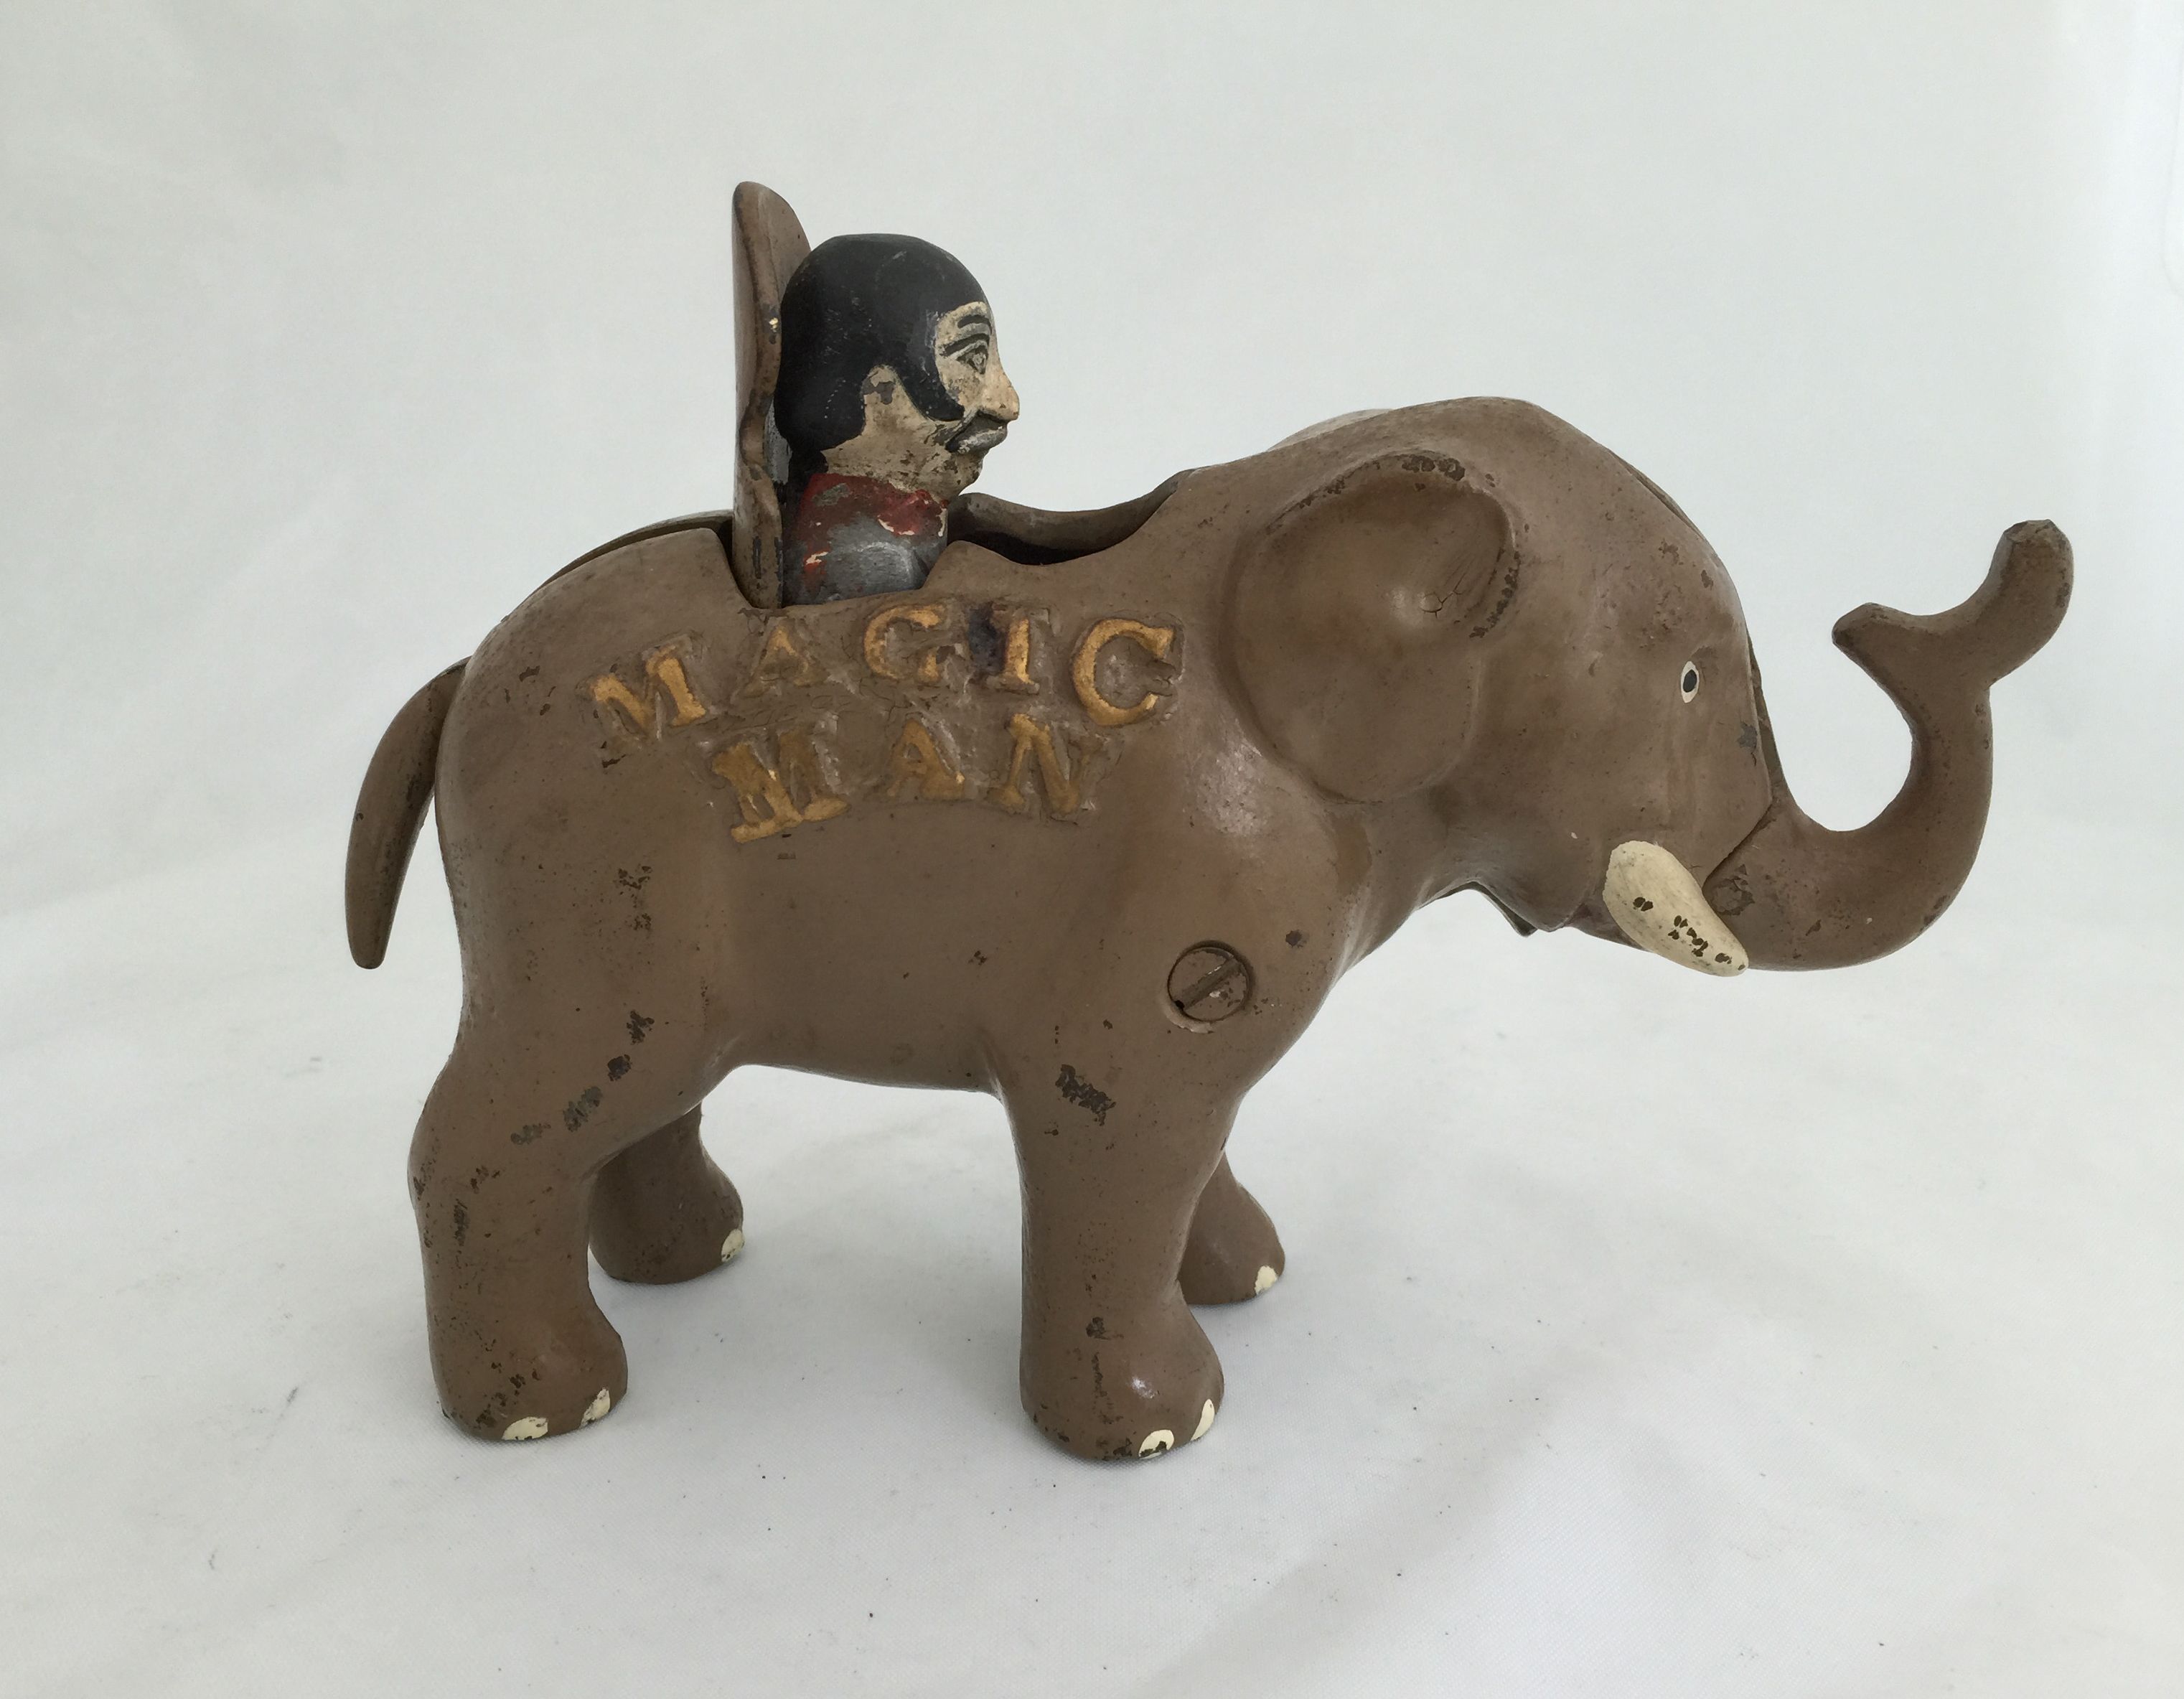 Magic Man cast-iron mechanical bank, only known example. RSL Auction image